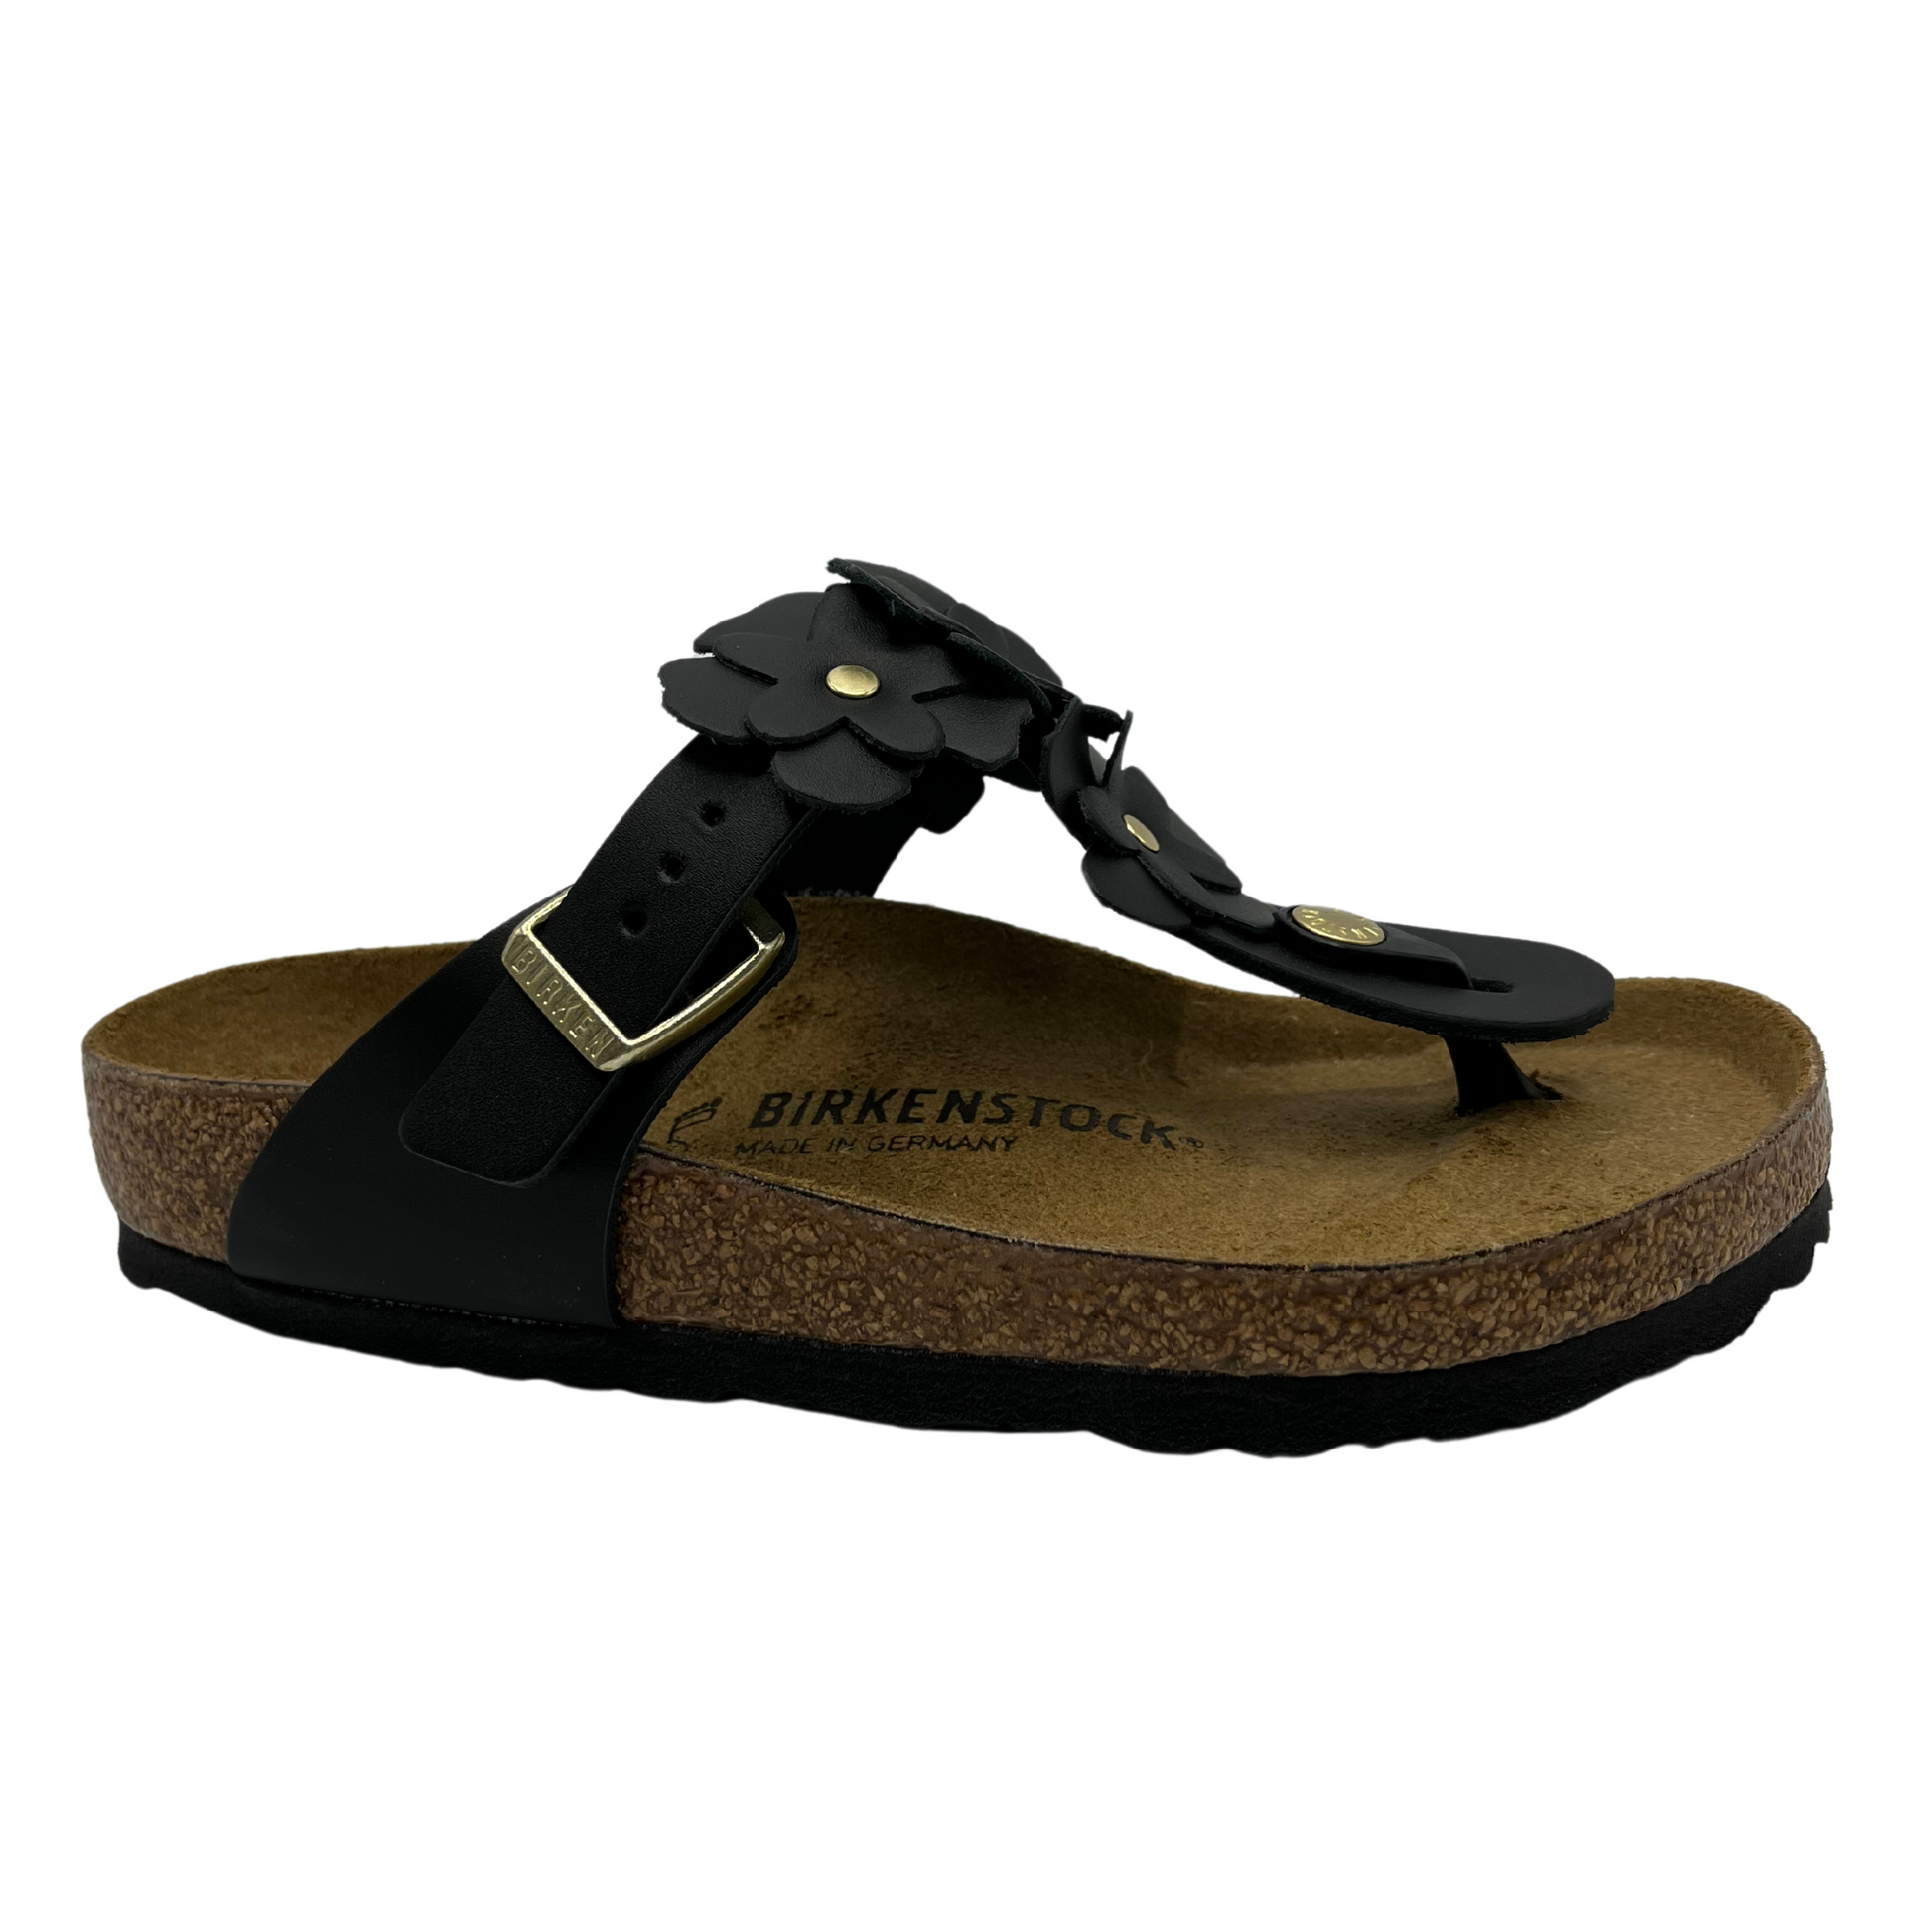 45 degree angled view of black leather sandals with flower shaped details and adjustable strap